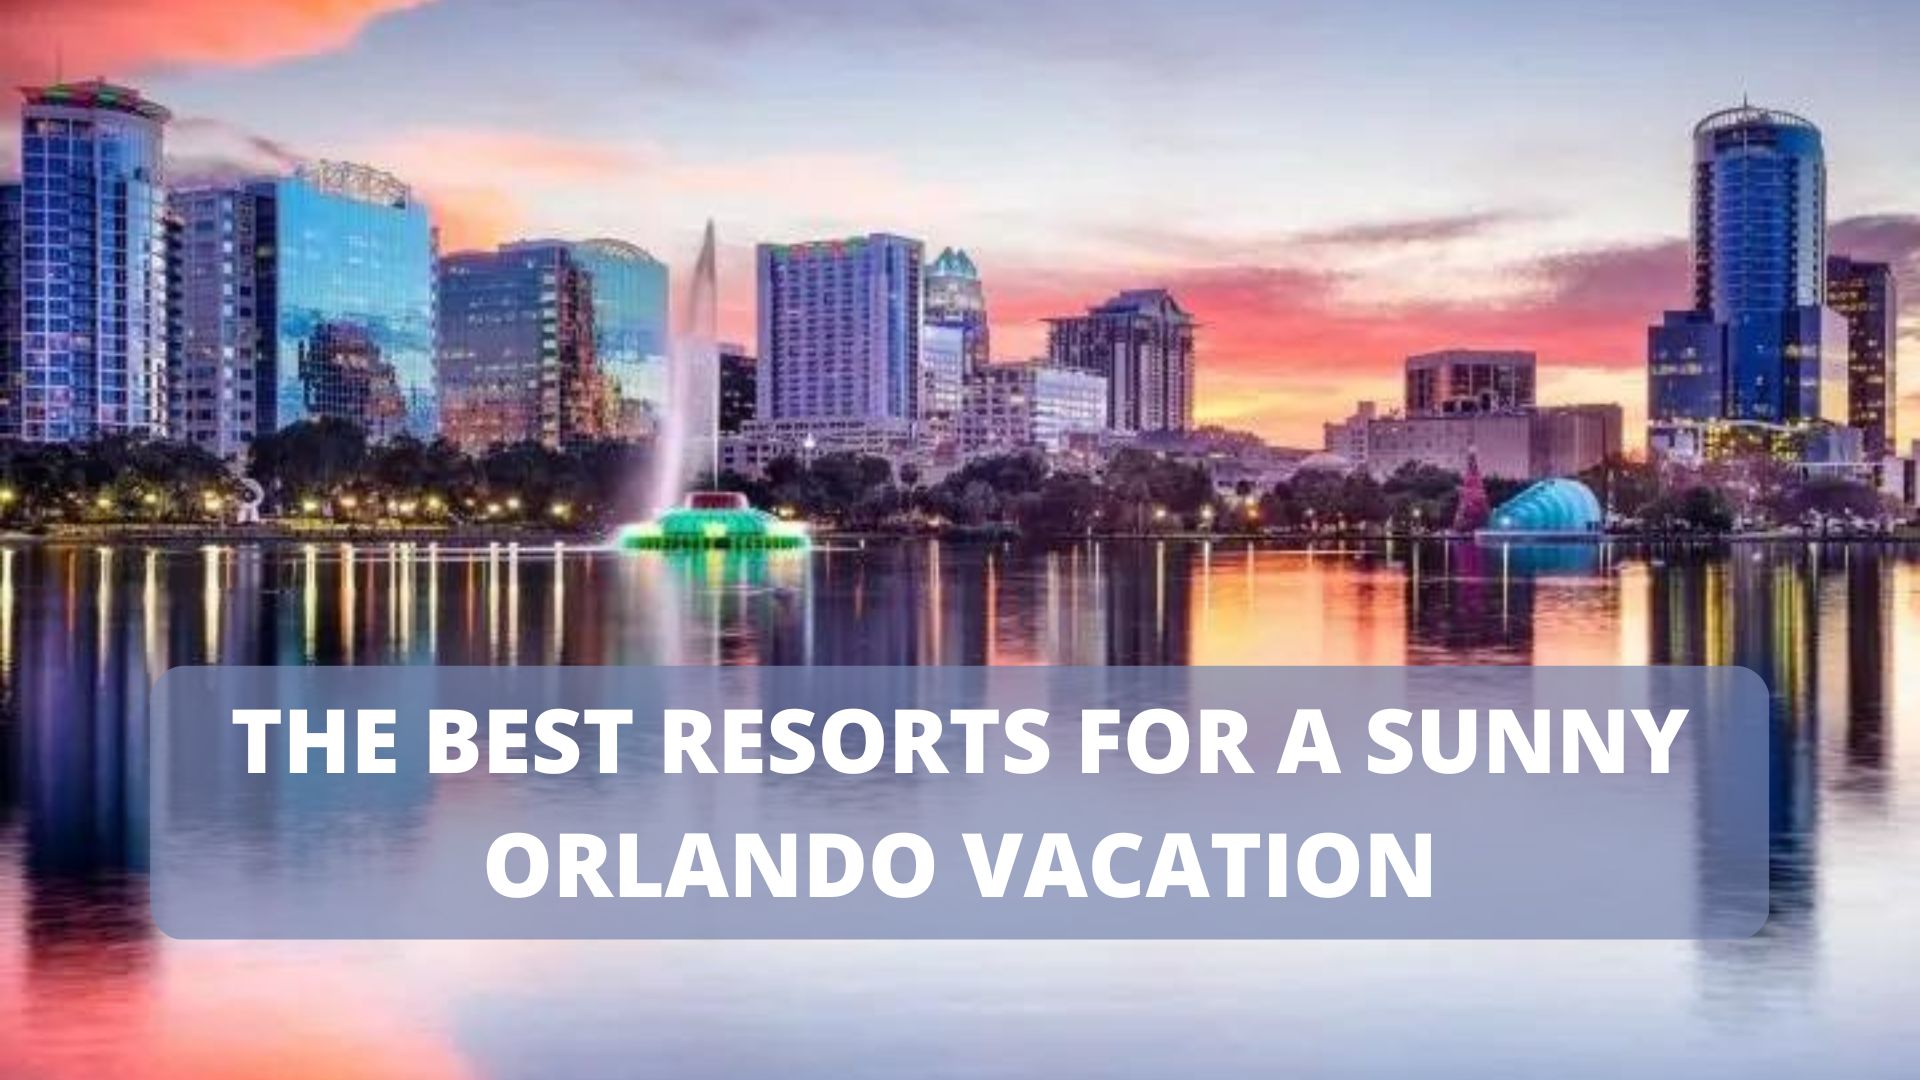 THE BEST RESORTS FOR A SUNNY ORLANDO VACATION